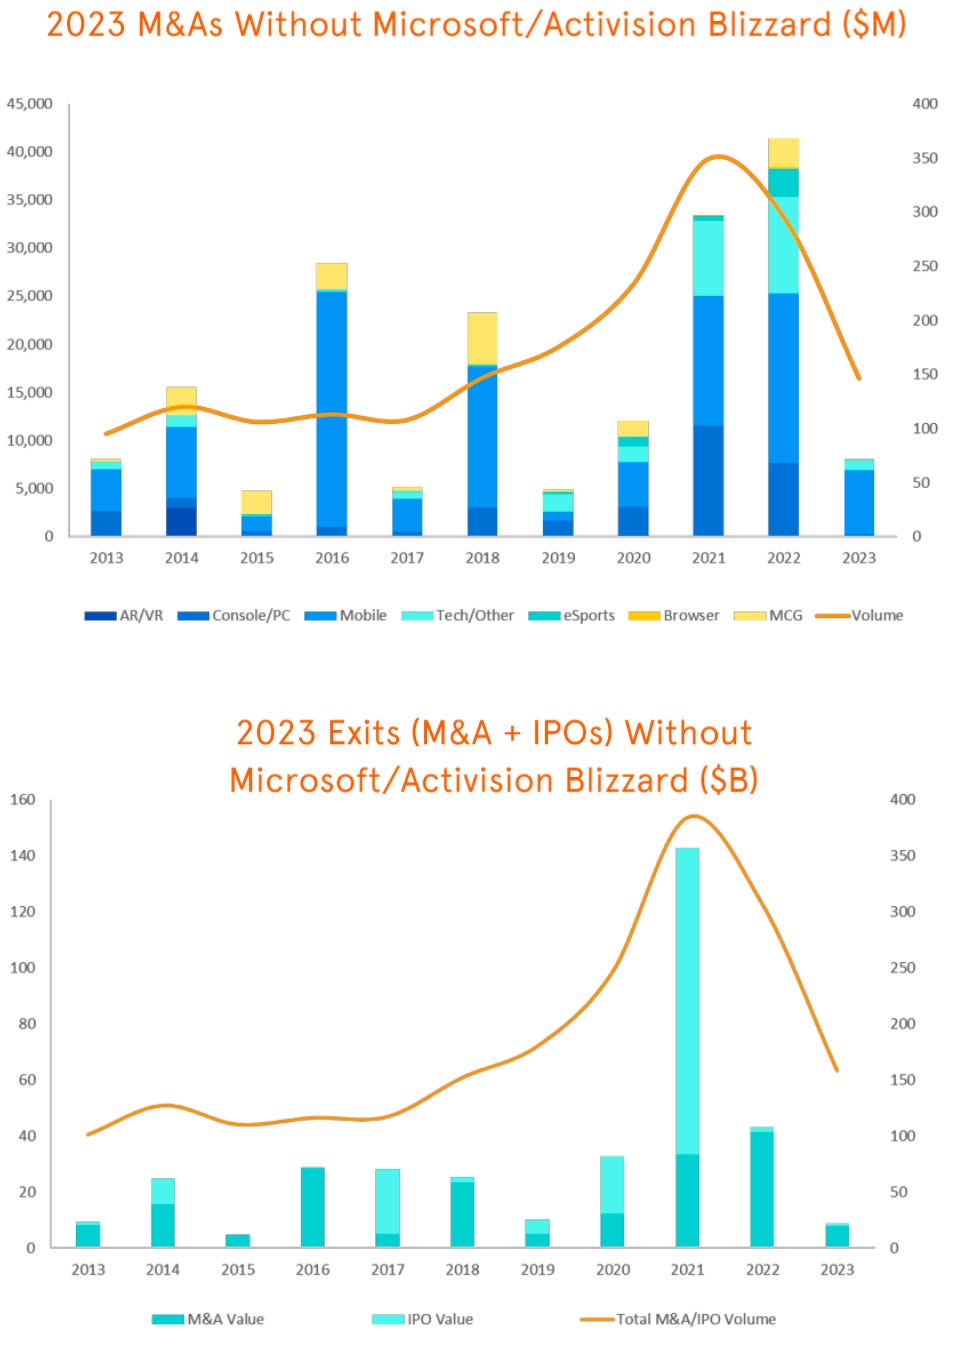 2023 M&As without Microsoft/Activision Blizzard